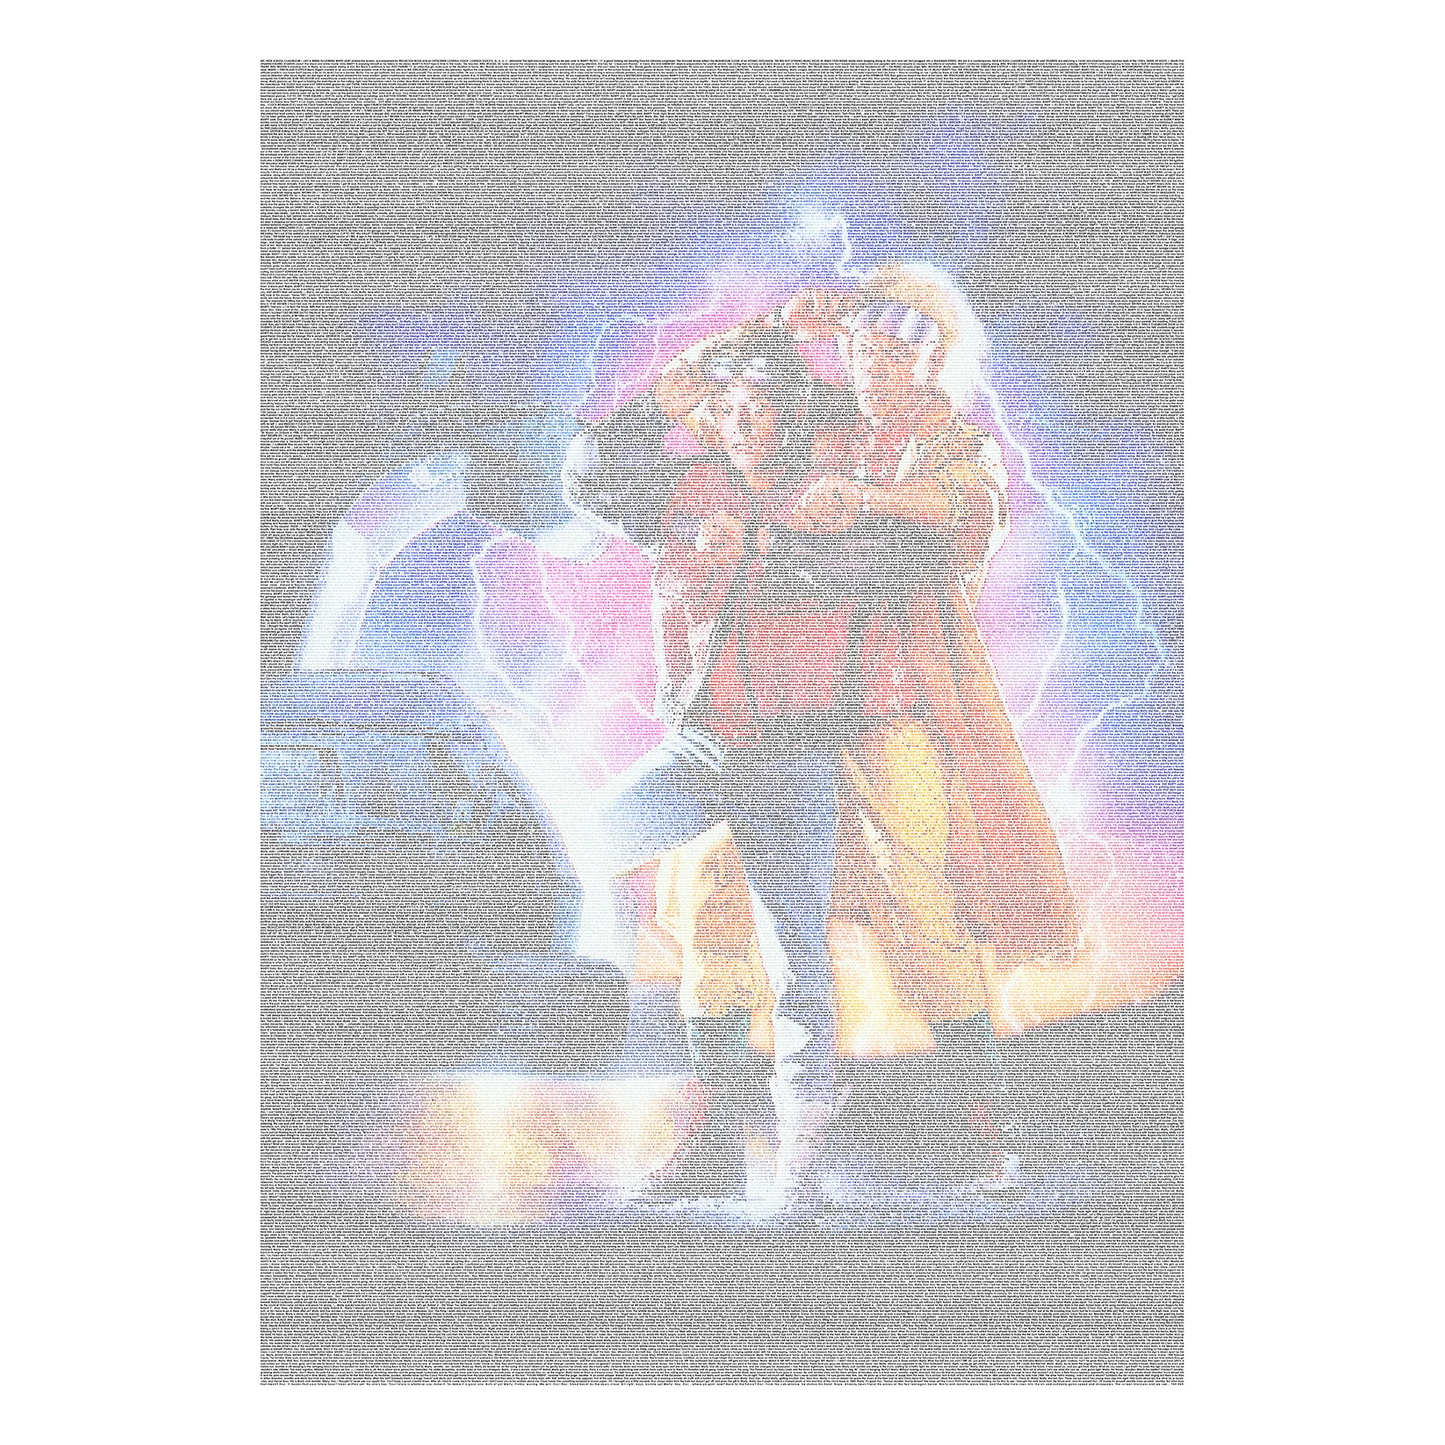 Back to the Future 2 poster, created from the script.